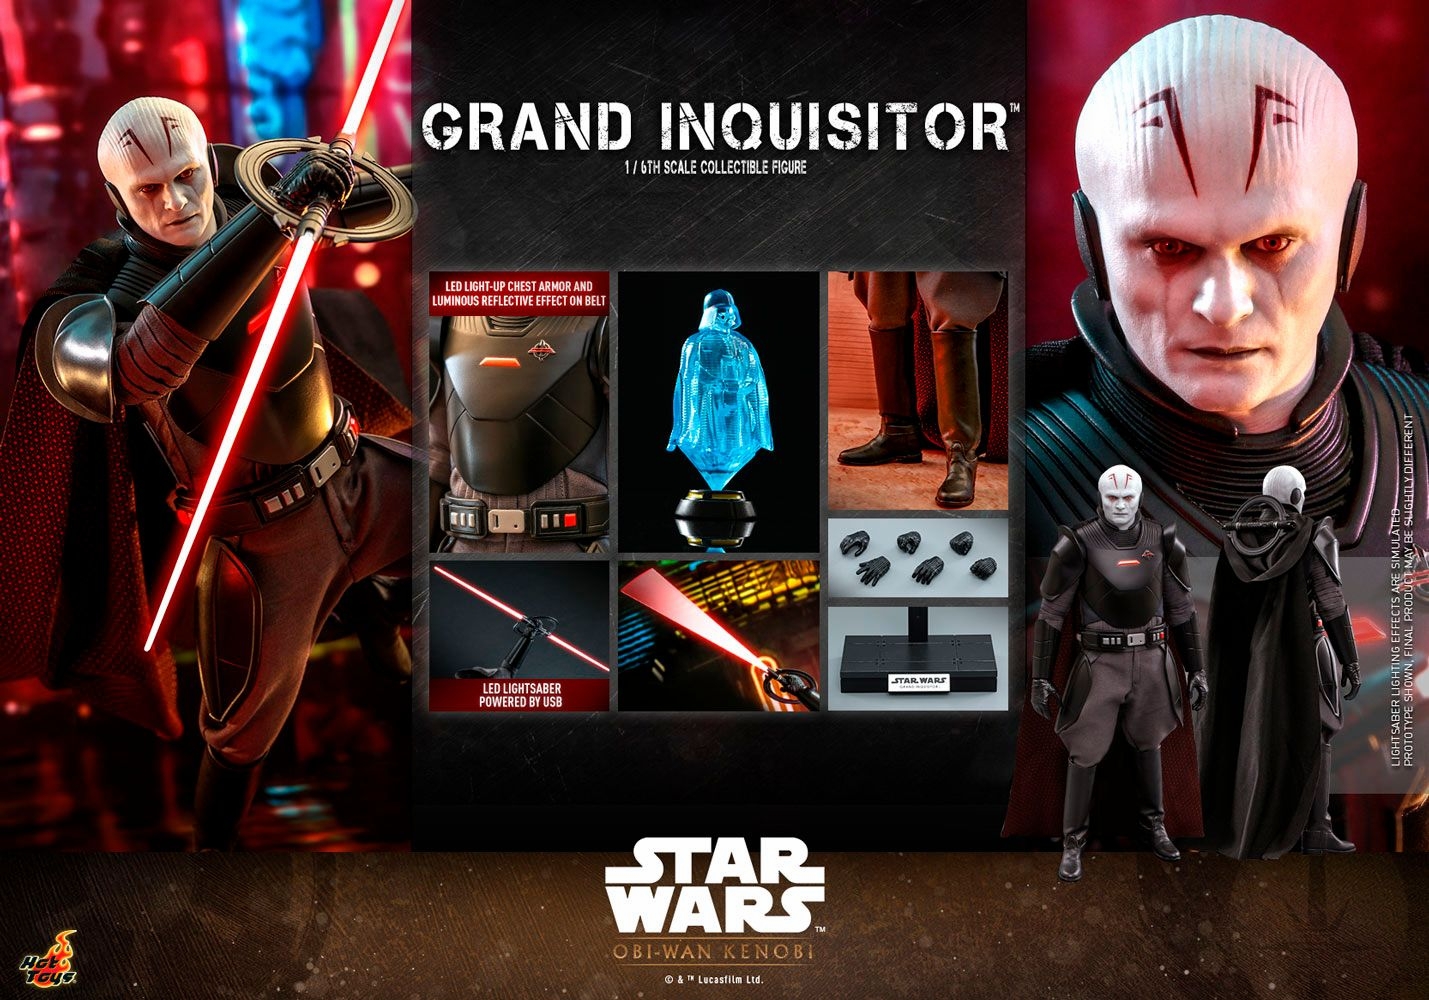 grand-inquisitor_star-wars_gallery_62fe89a1ce957.jpg